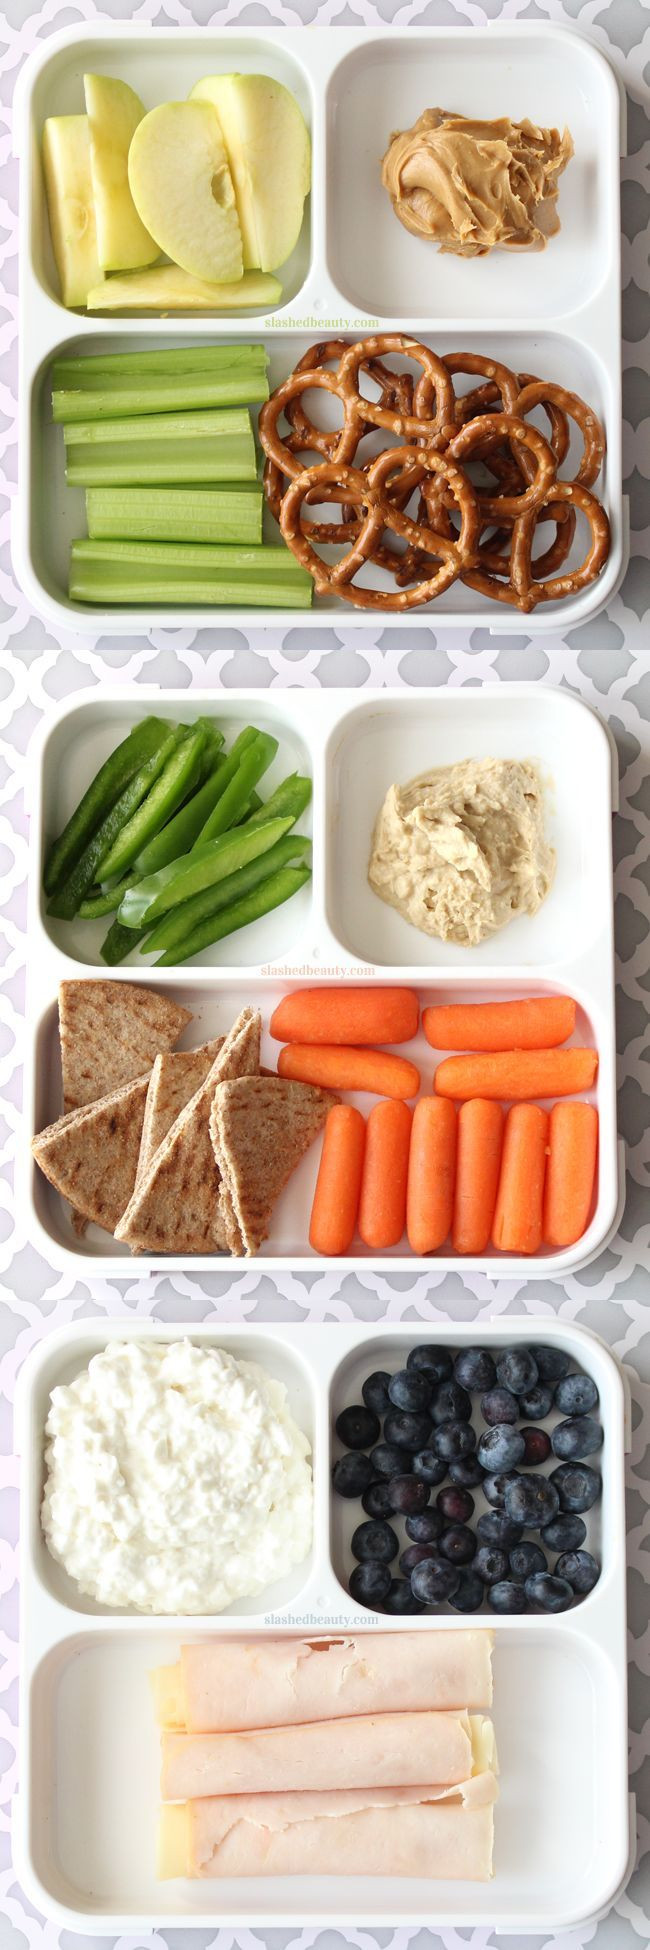 Healthy Snacks Pinterest
 549 best images about Healthy Snacks For Kids on Pinterest